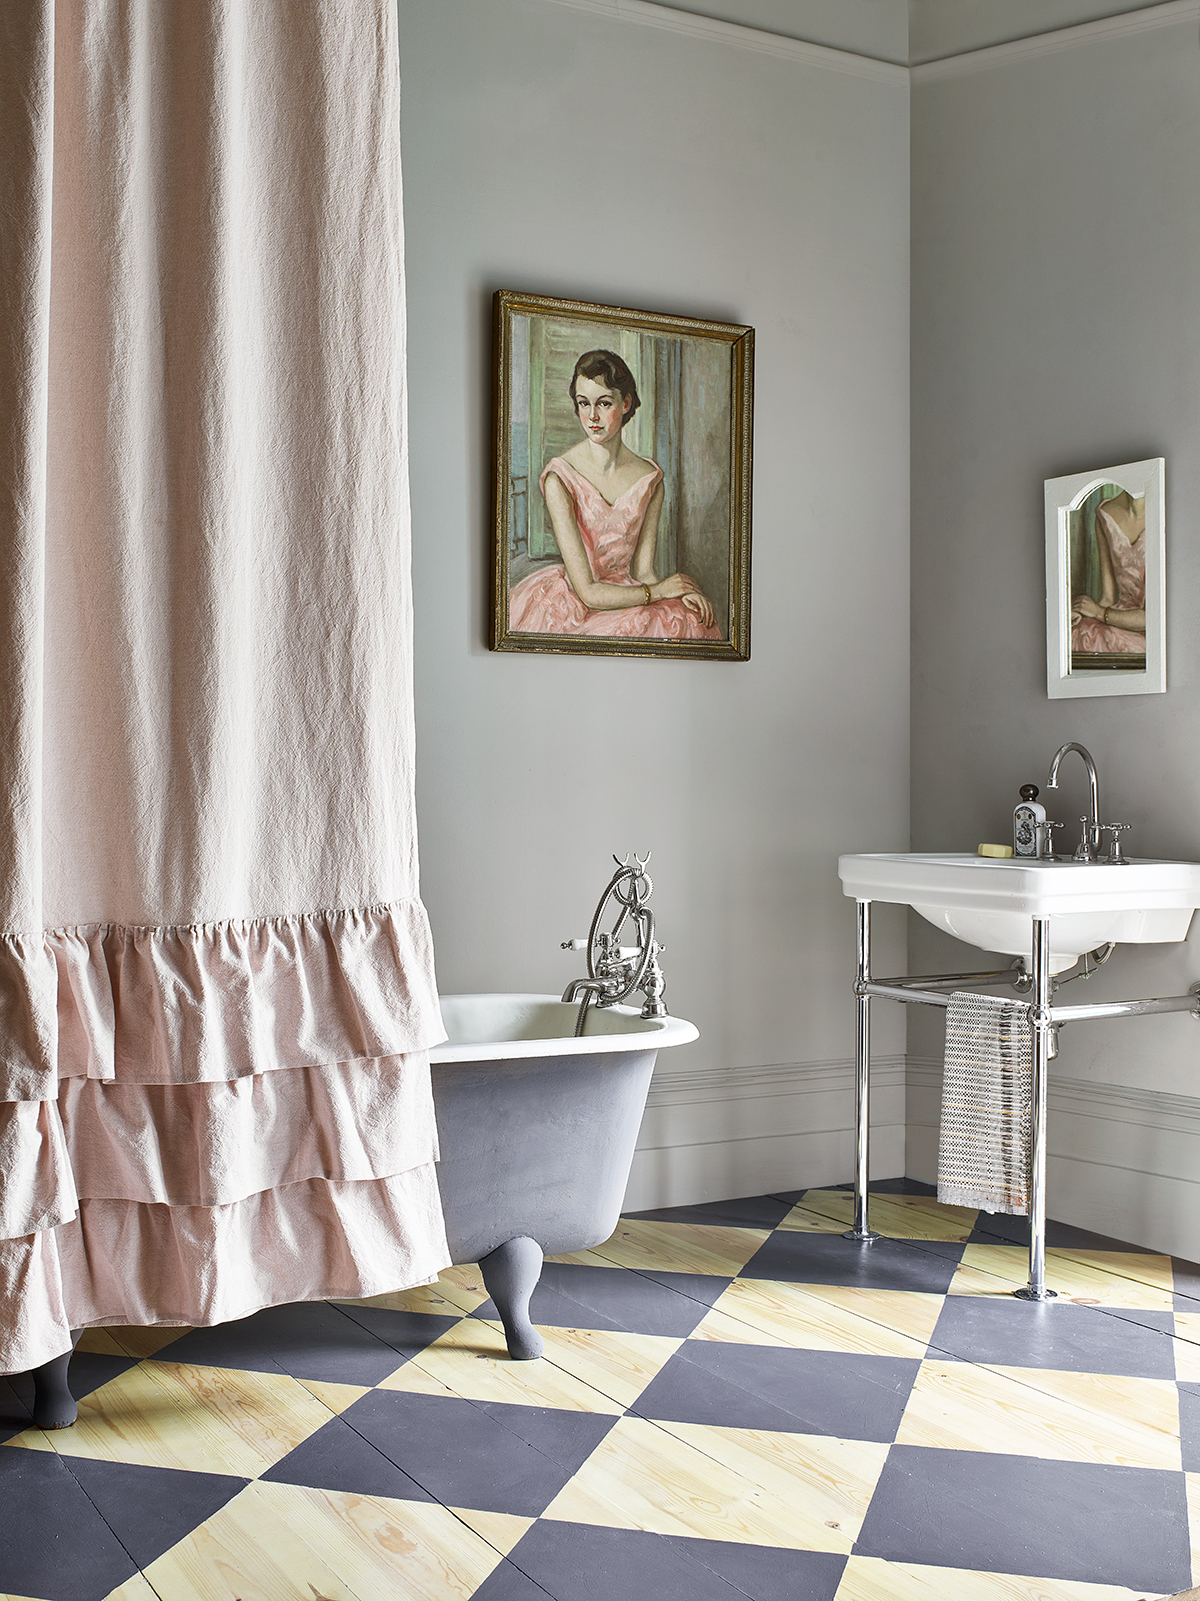 Annie Sloan Bathroom Painted in Paris Grey Wall Paint featuring Checkerboard Floor Using Old Violet Chalk Paint with Antoinette and Old White Fabric by Annie Sloan